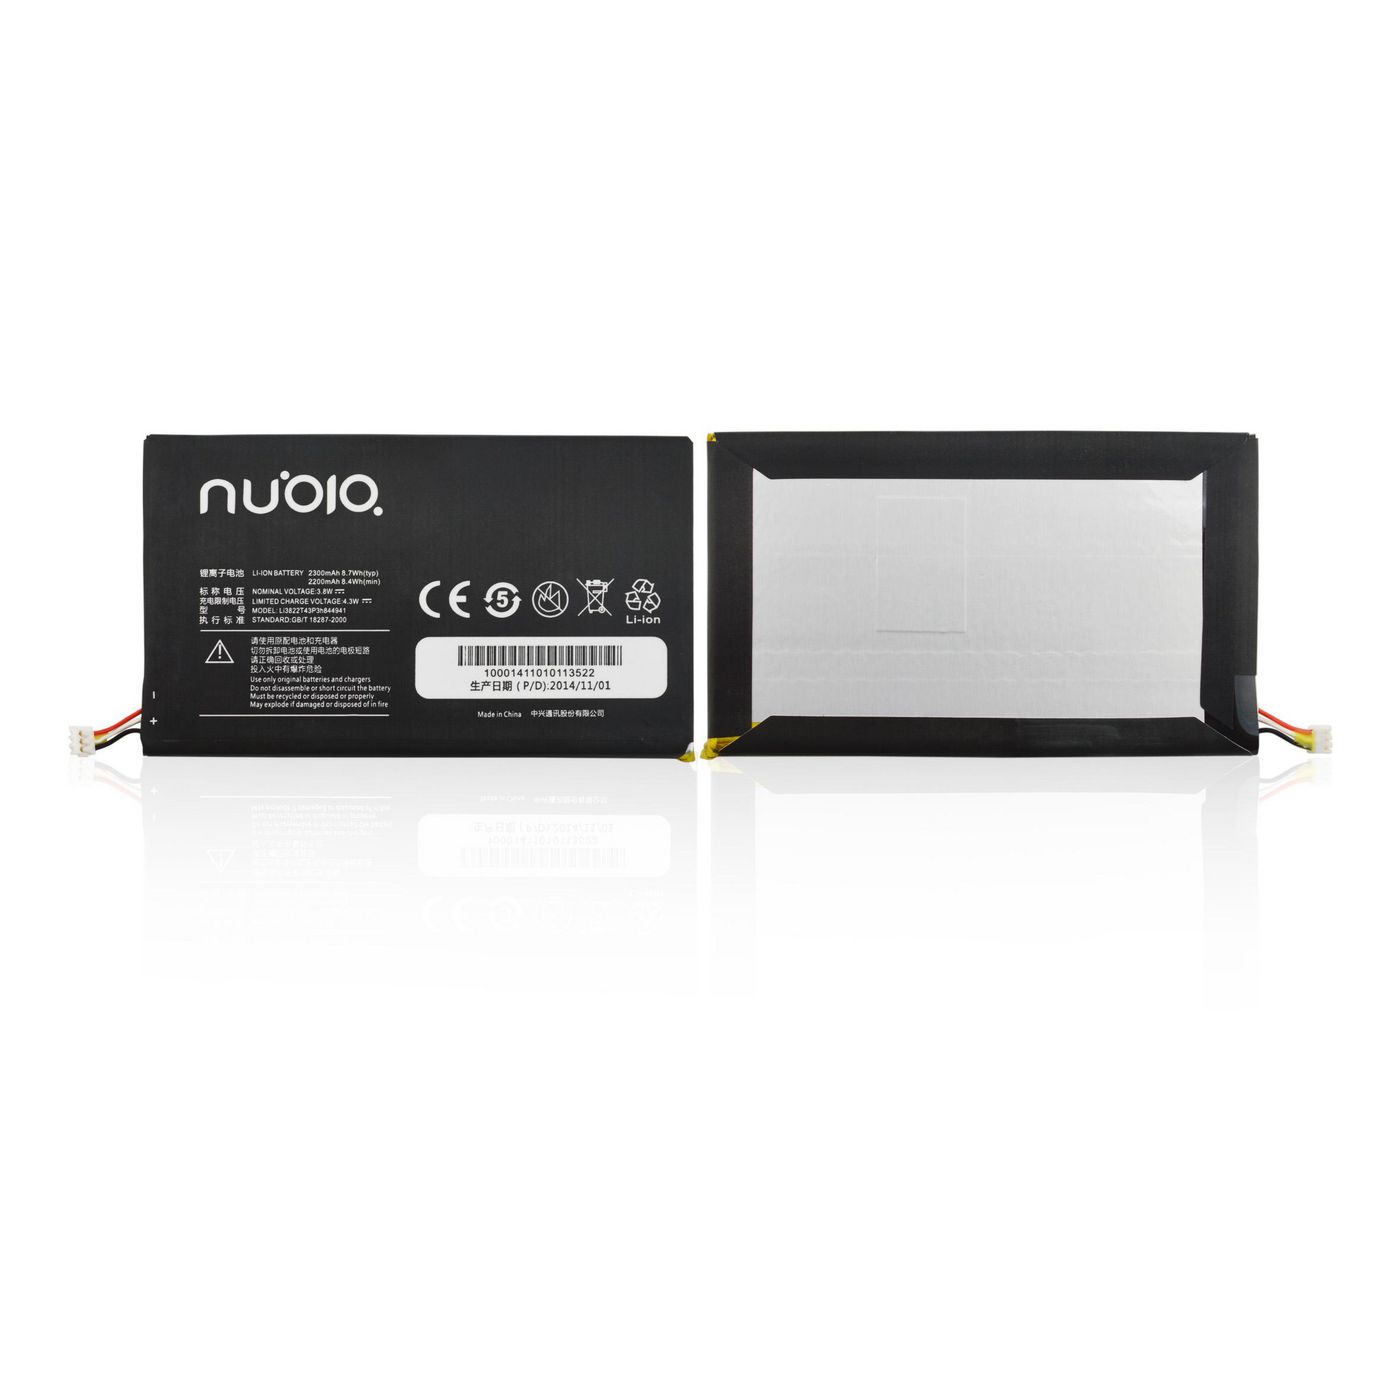 CoreParts MSPP70416 Battery for Nubia Mobile 